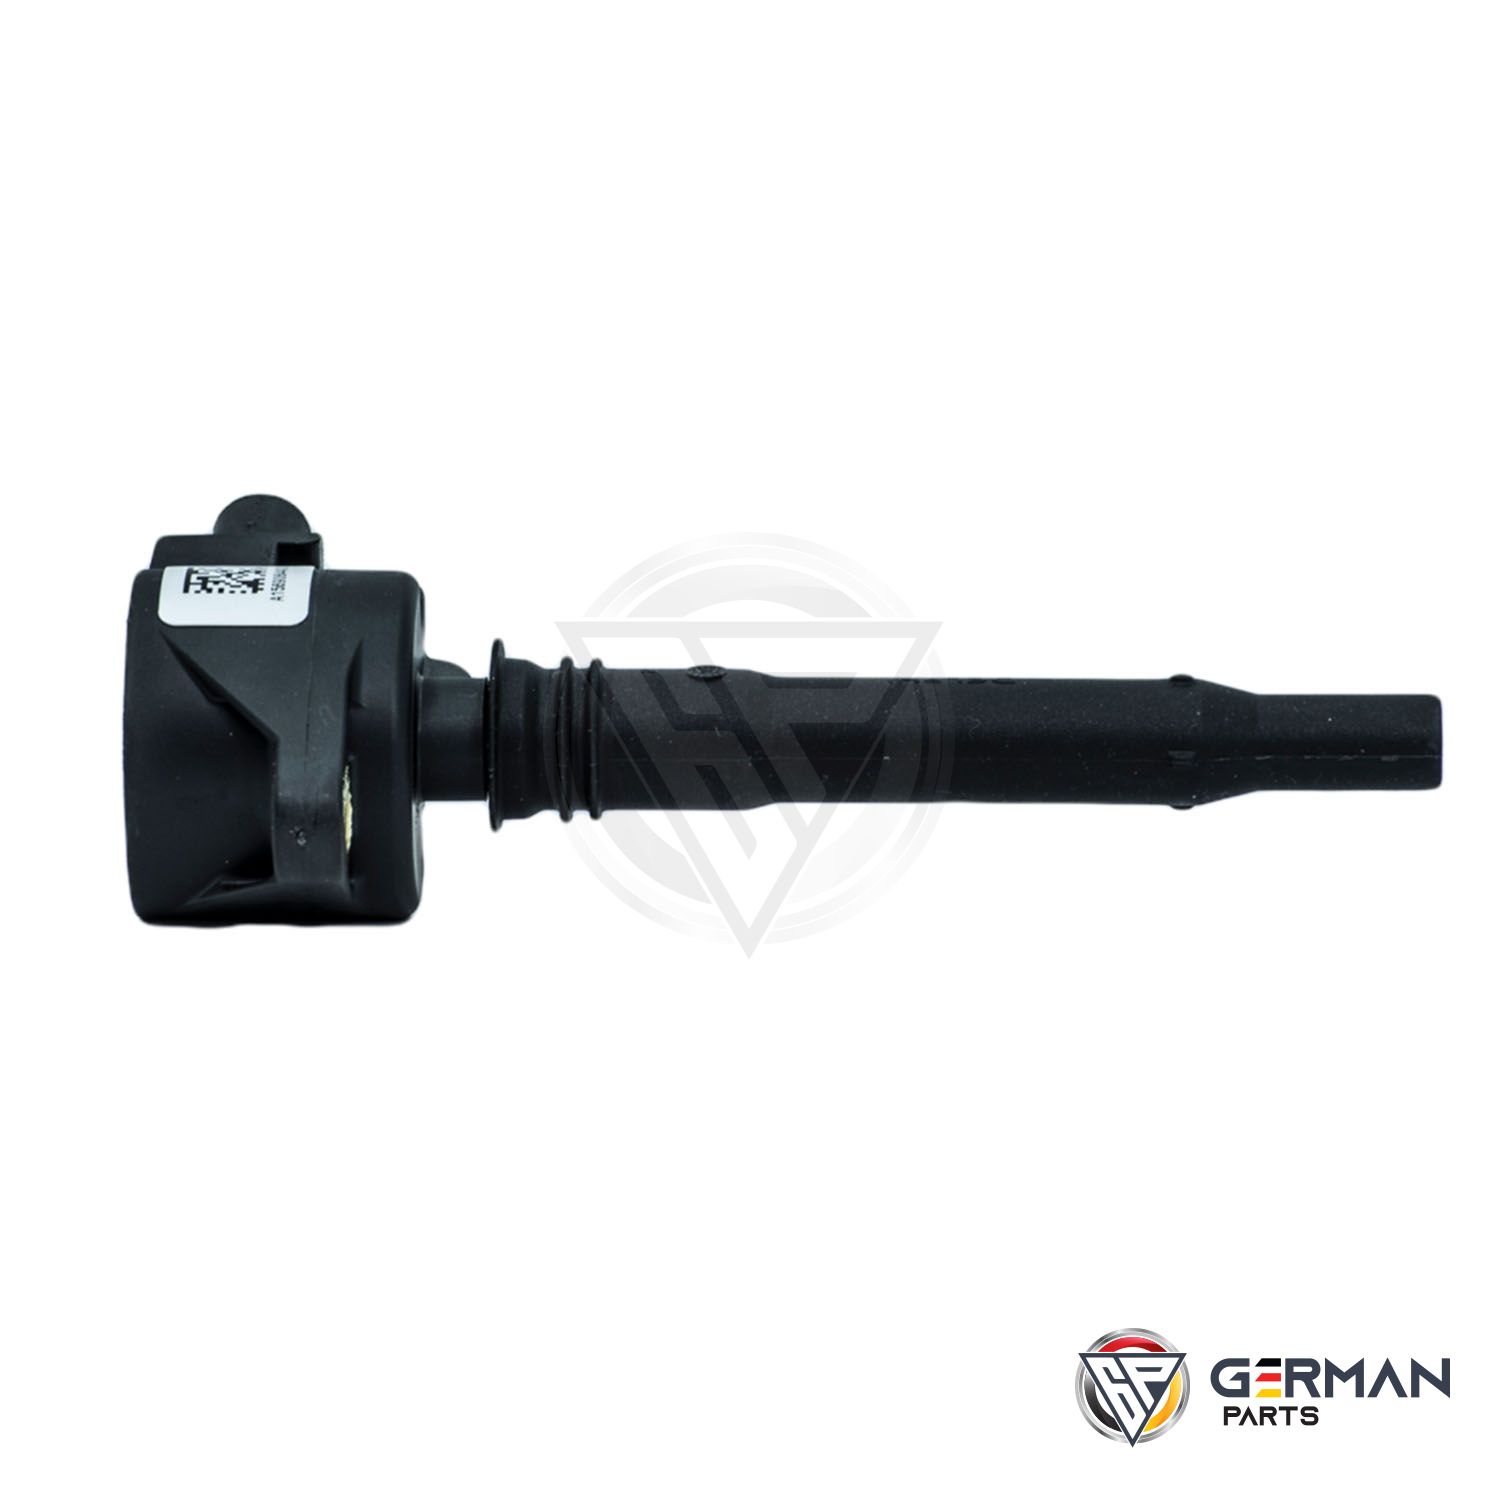 Buy Mercedes Benz Ignition Coil 1569064400 - German Parts